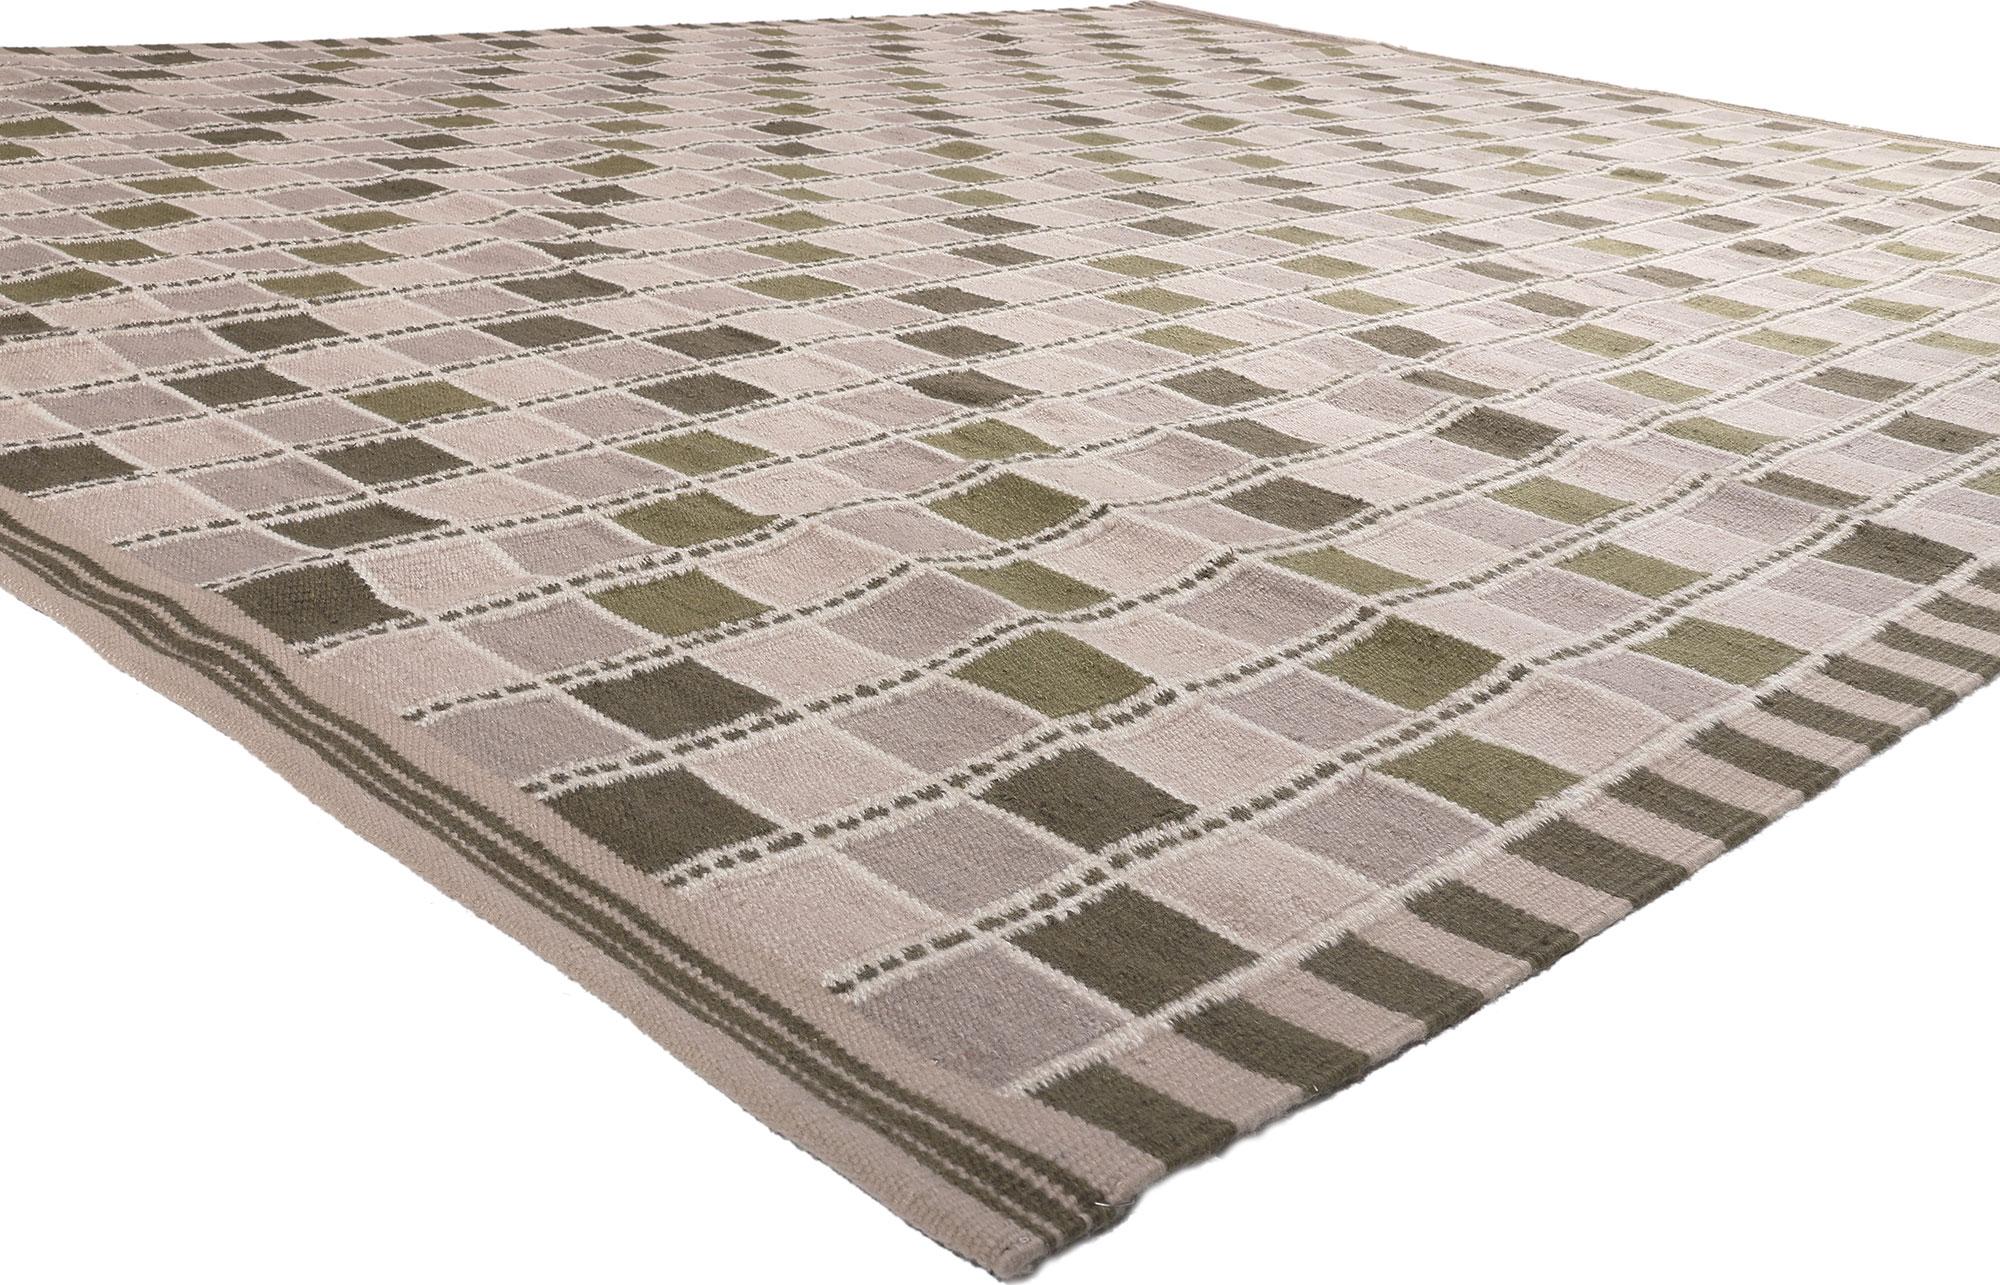 30952 New Swedish Inspired Kilim Rug, 10'05 x 12'09.
Scandinavian Modern meets Japanese Zen in this handwoven wool Swedish-inspired kilim rug. The neutral checkerboard pattern and earthy hues woven into this piece lends a laid-back, cozy feel. The